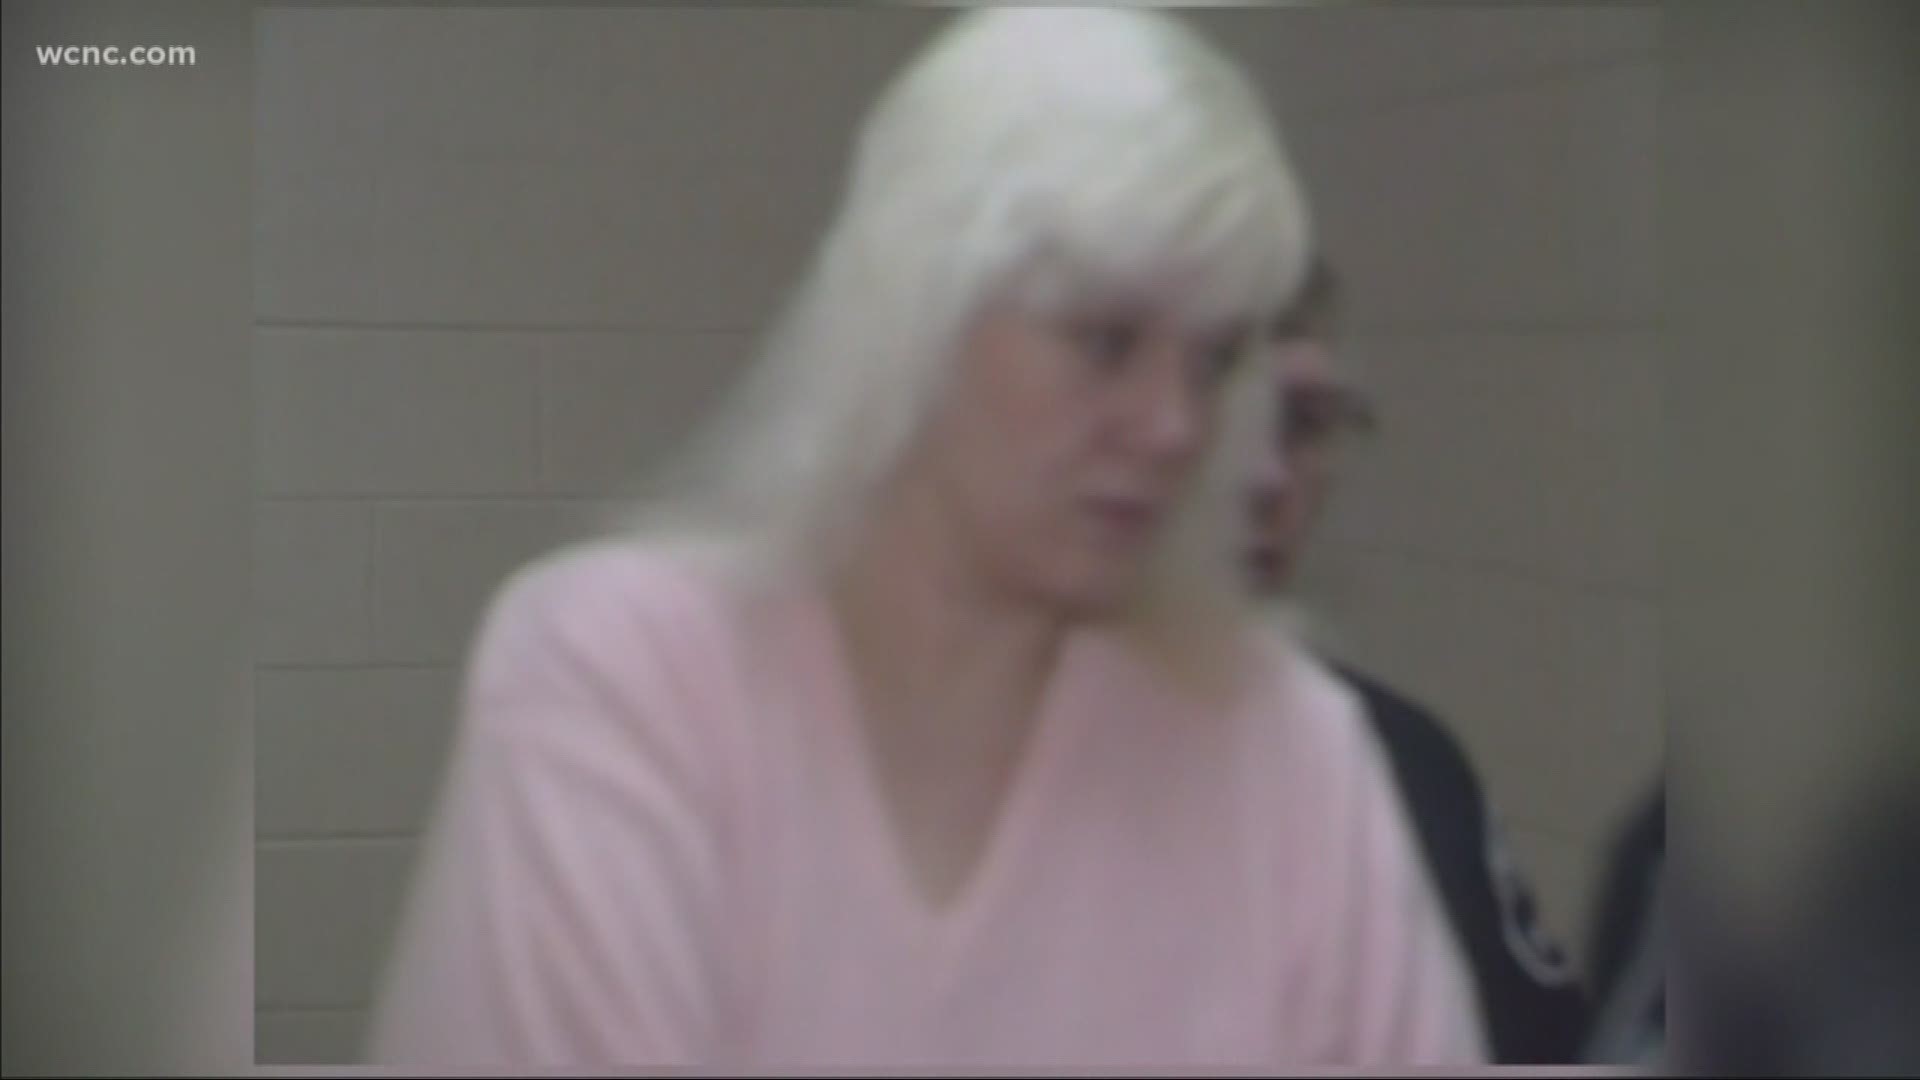 Catherine Wood was convicted of second-degree murder for her role in the 1987 deaths of five elderly people at a Michigan senior living facility.